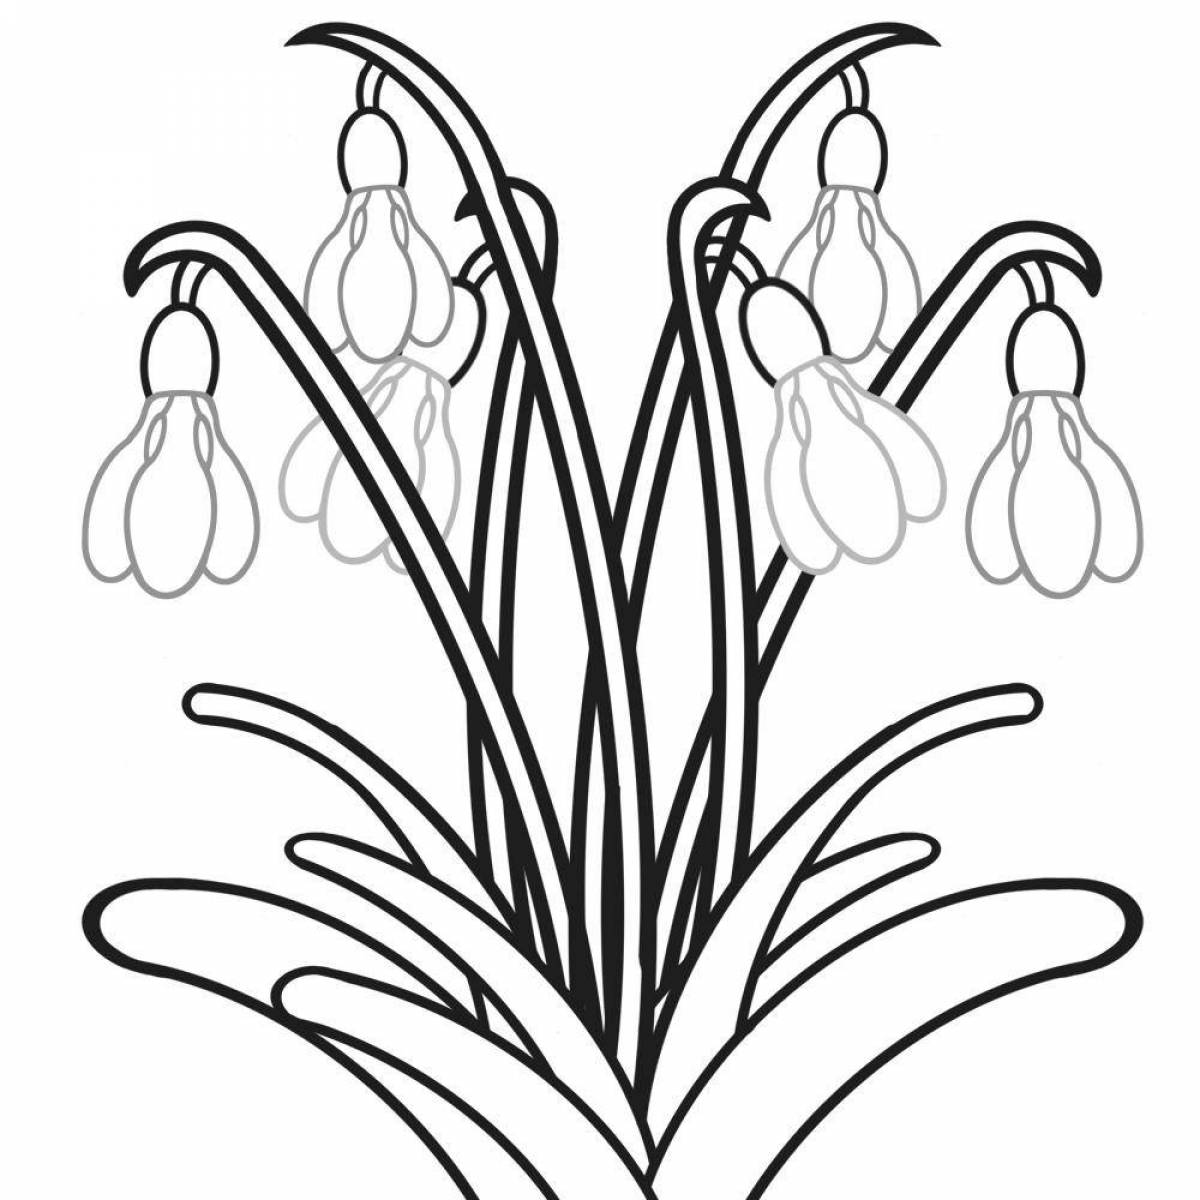 Glorious snowdrops coloring for children